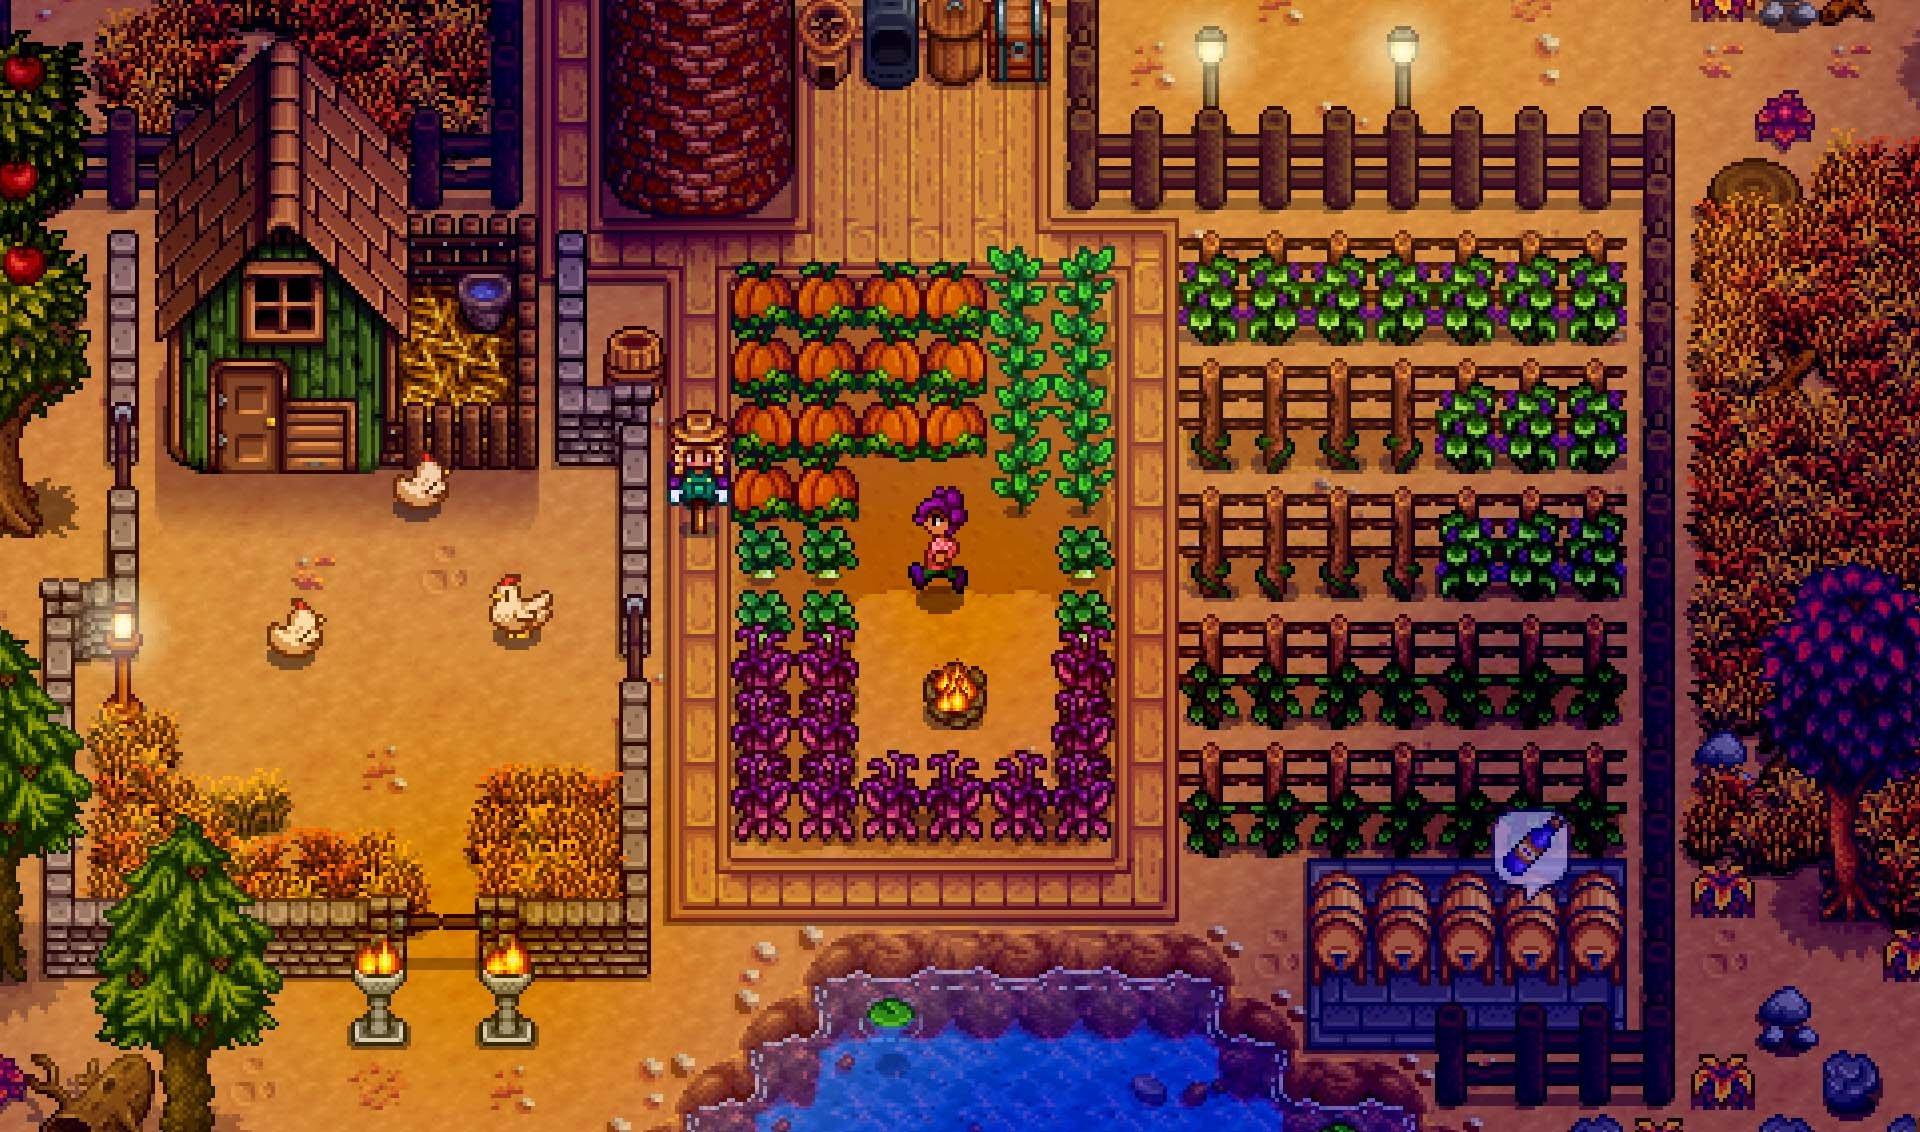 is there a physical copy of stardew valley for switch